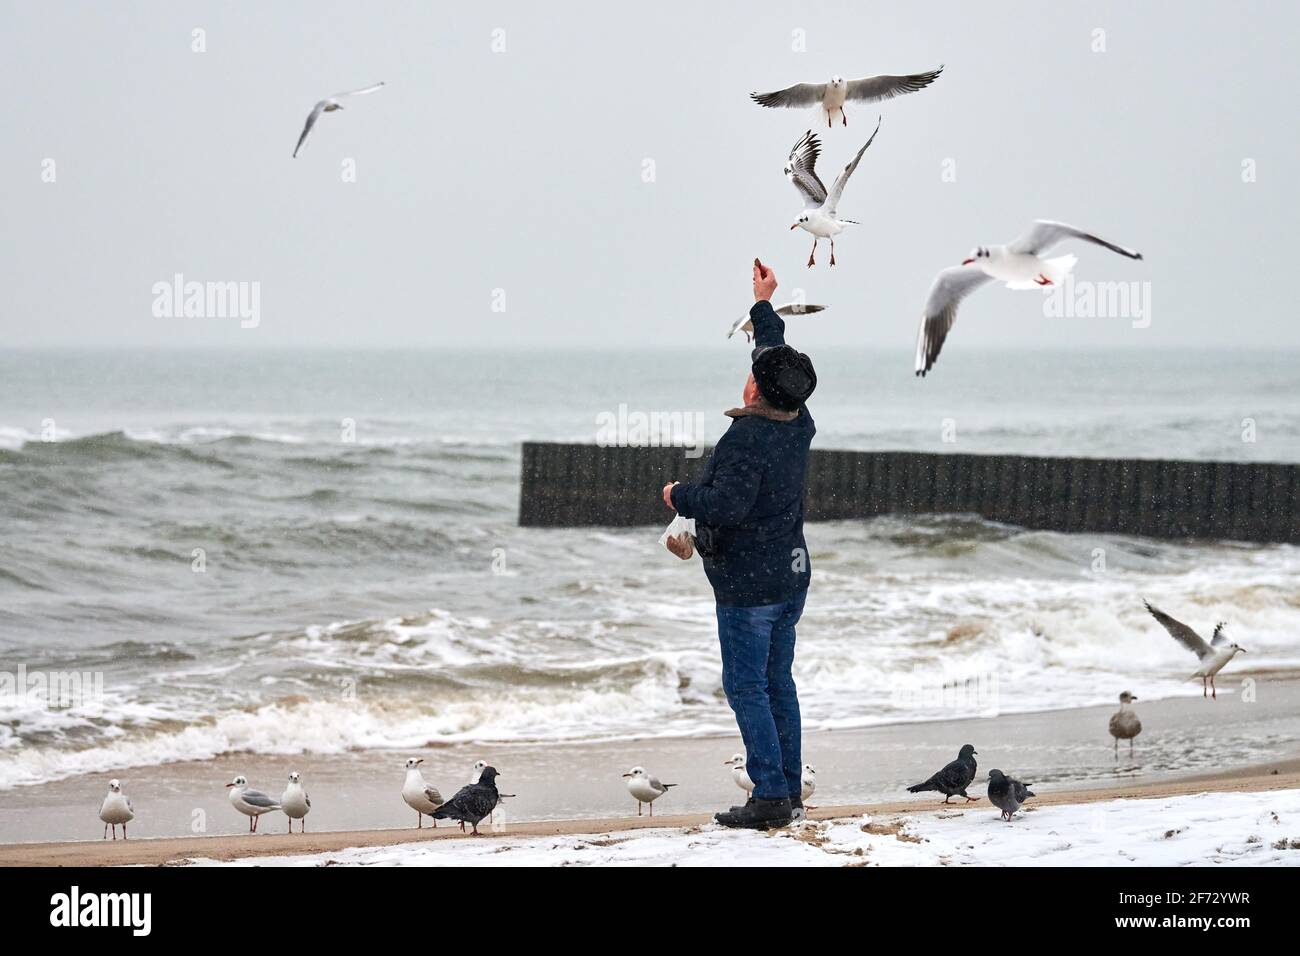 Lonely old man feeding gulls, seagulls and other birds at sea. Back view of person, cloudy winter landscape. Stock Photo